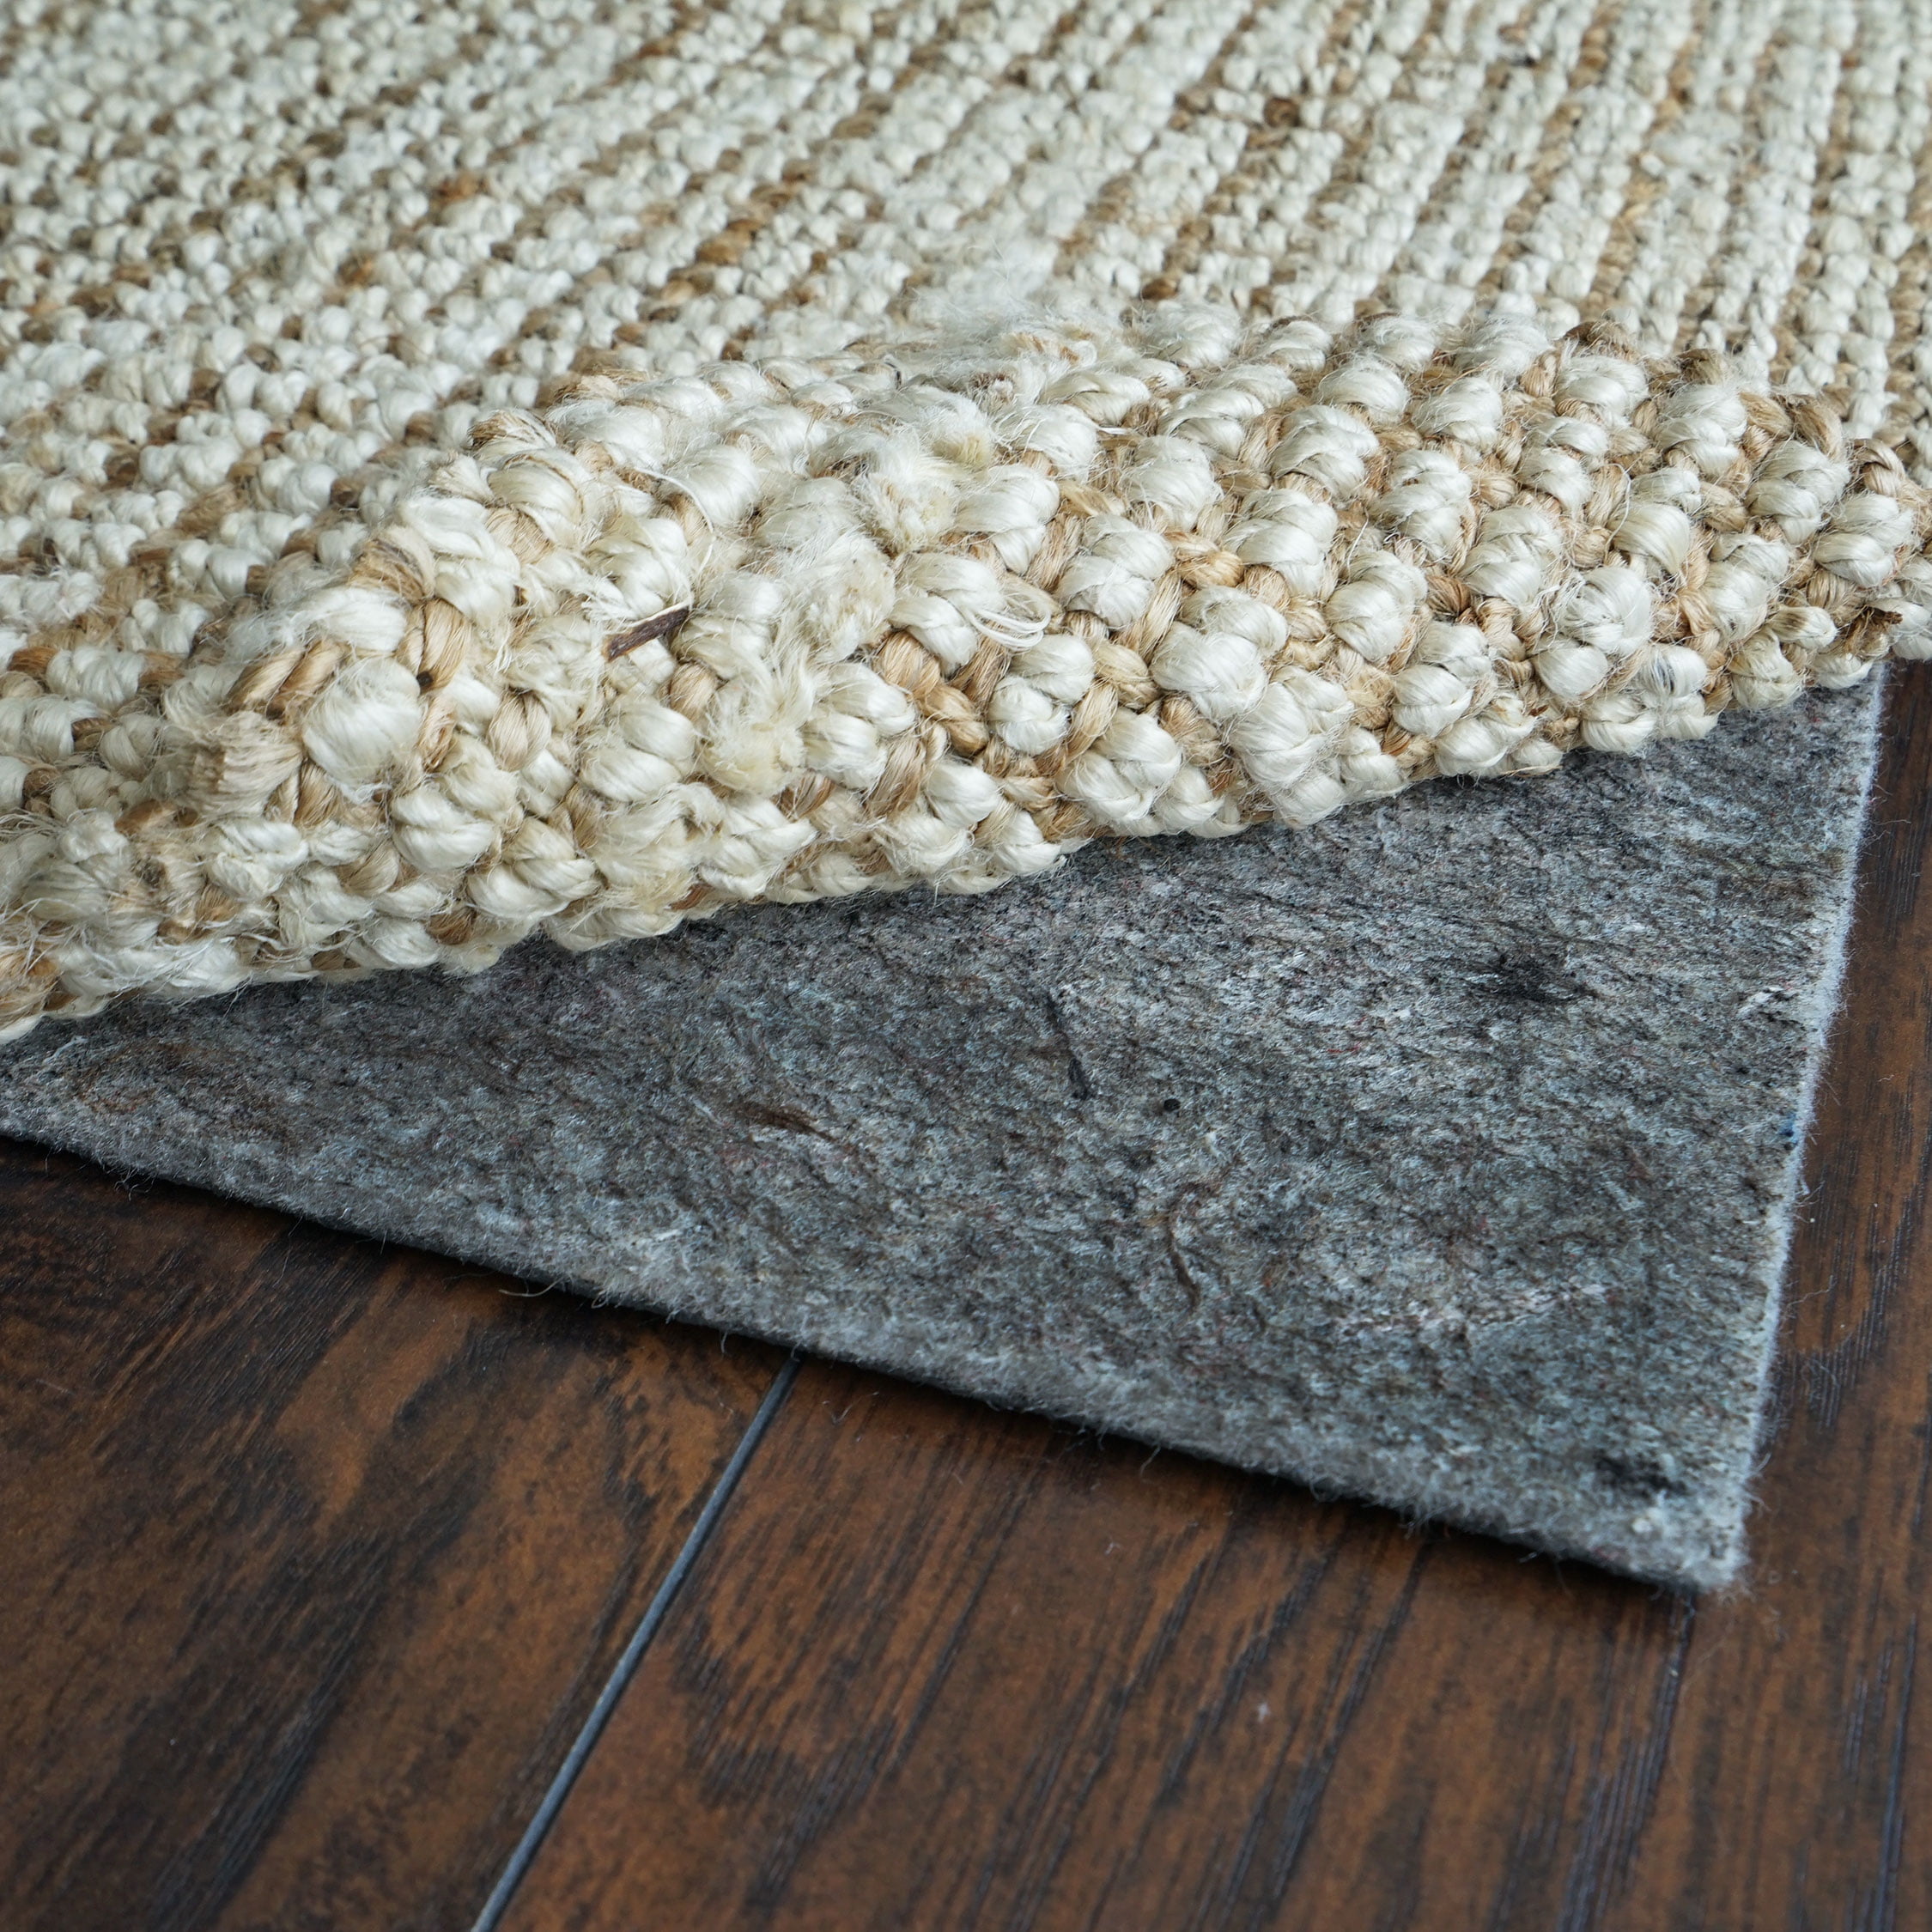 Non Slip Area Rug Pad-Multiple Sizes-Durable Reversible for Hard Surfaces/Carpet 